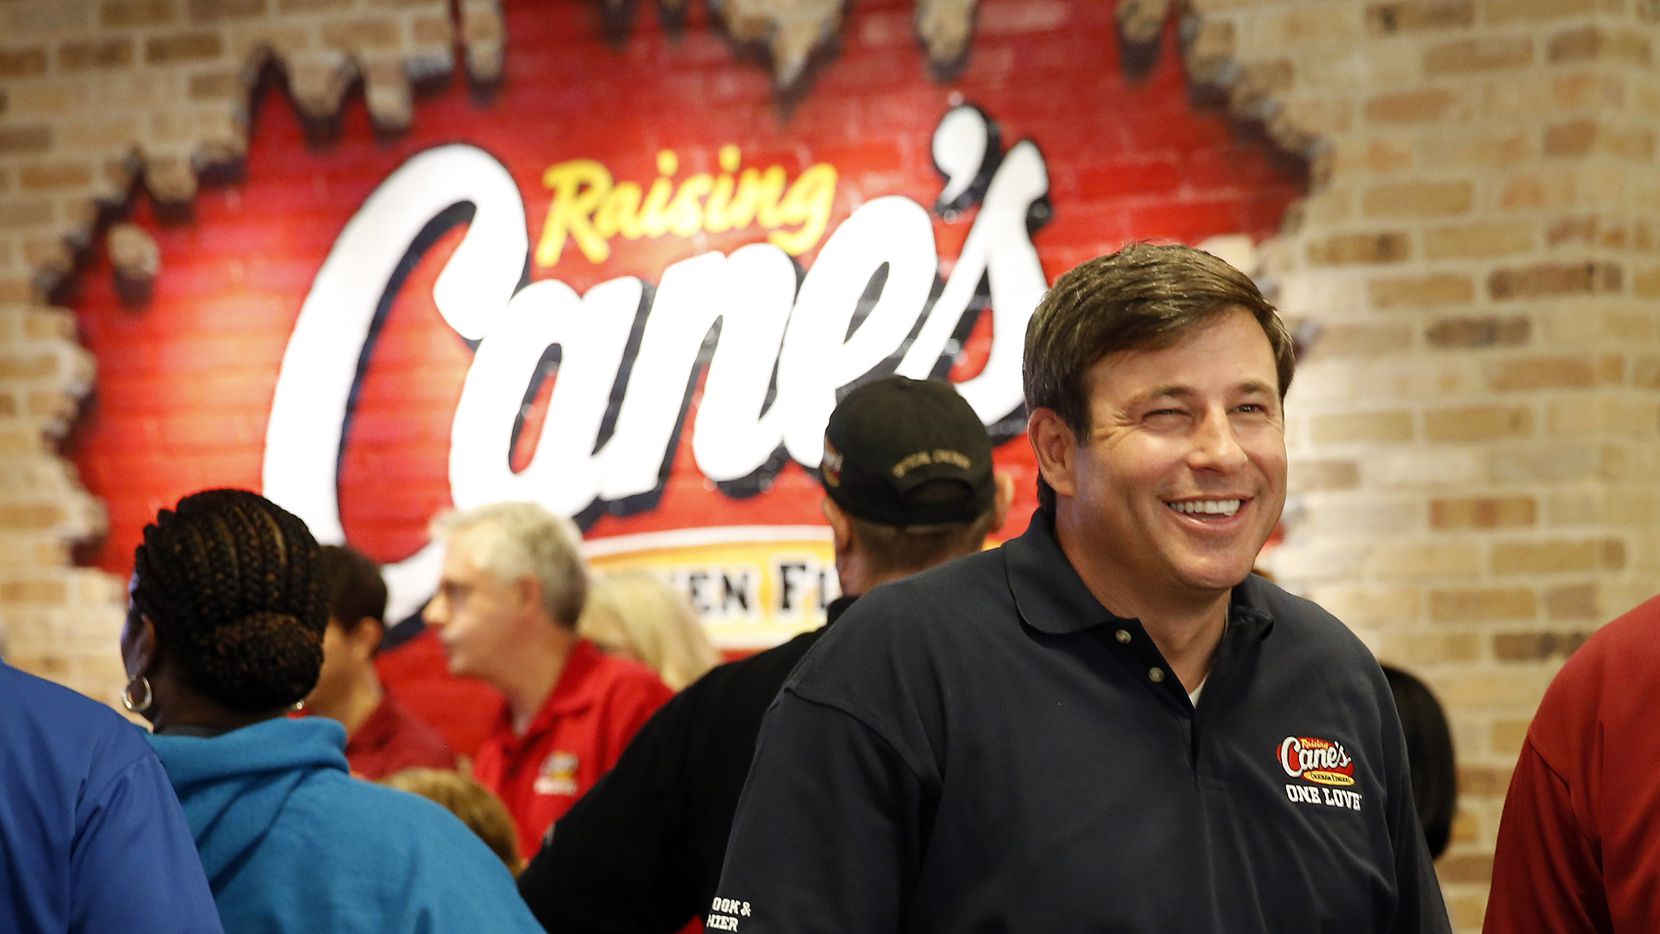 Raising Cane's Chicken Fingers founder Todd Graves (right) visits with employees at their...